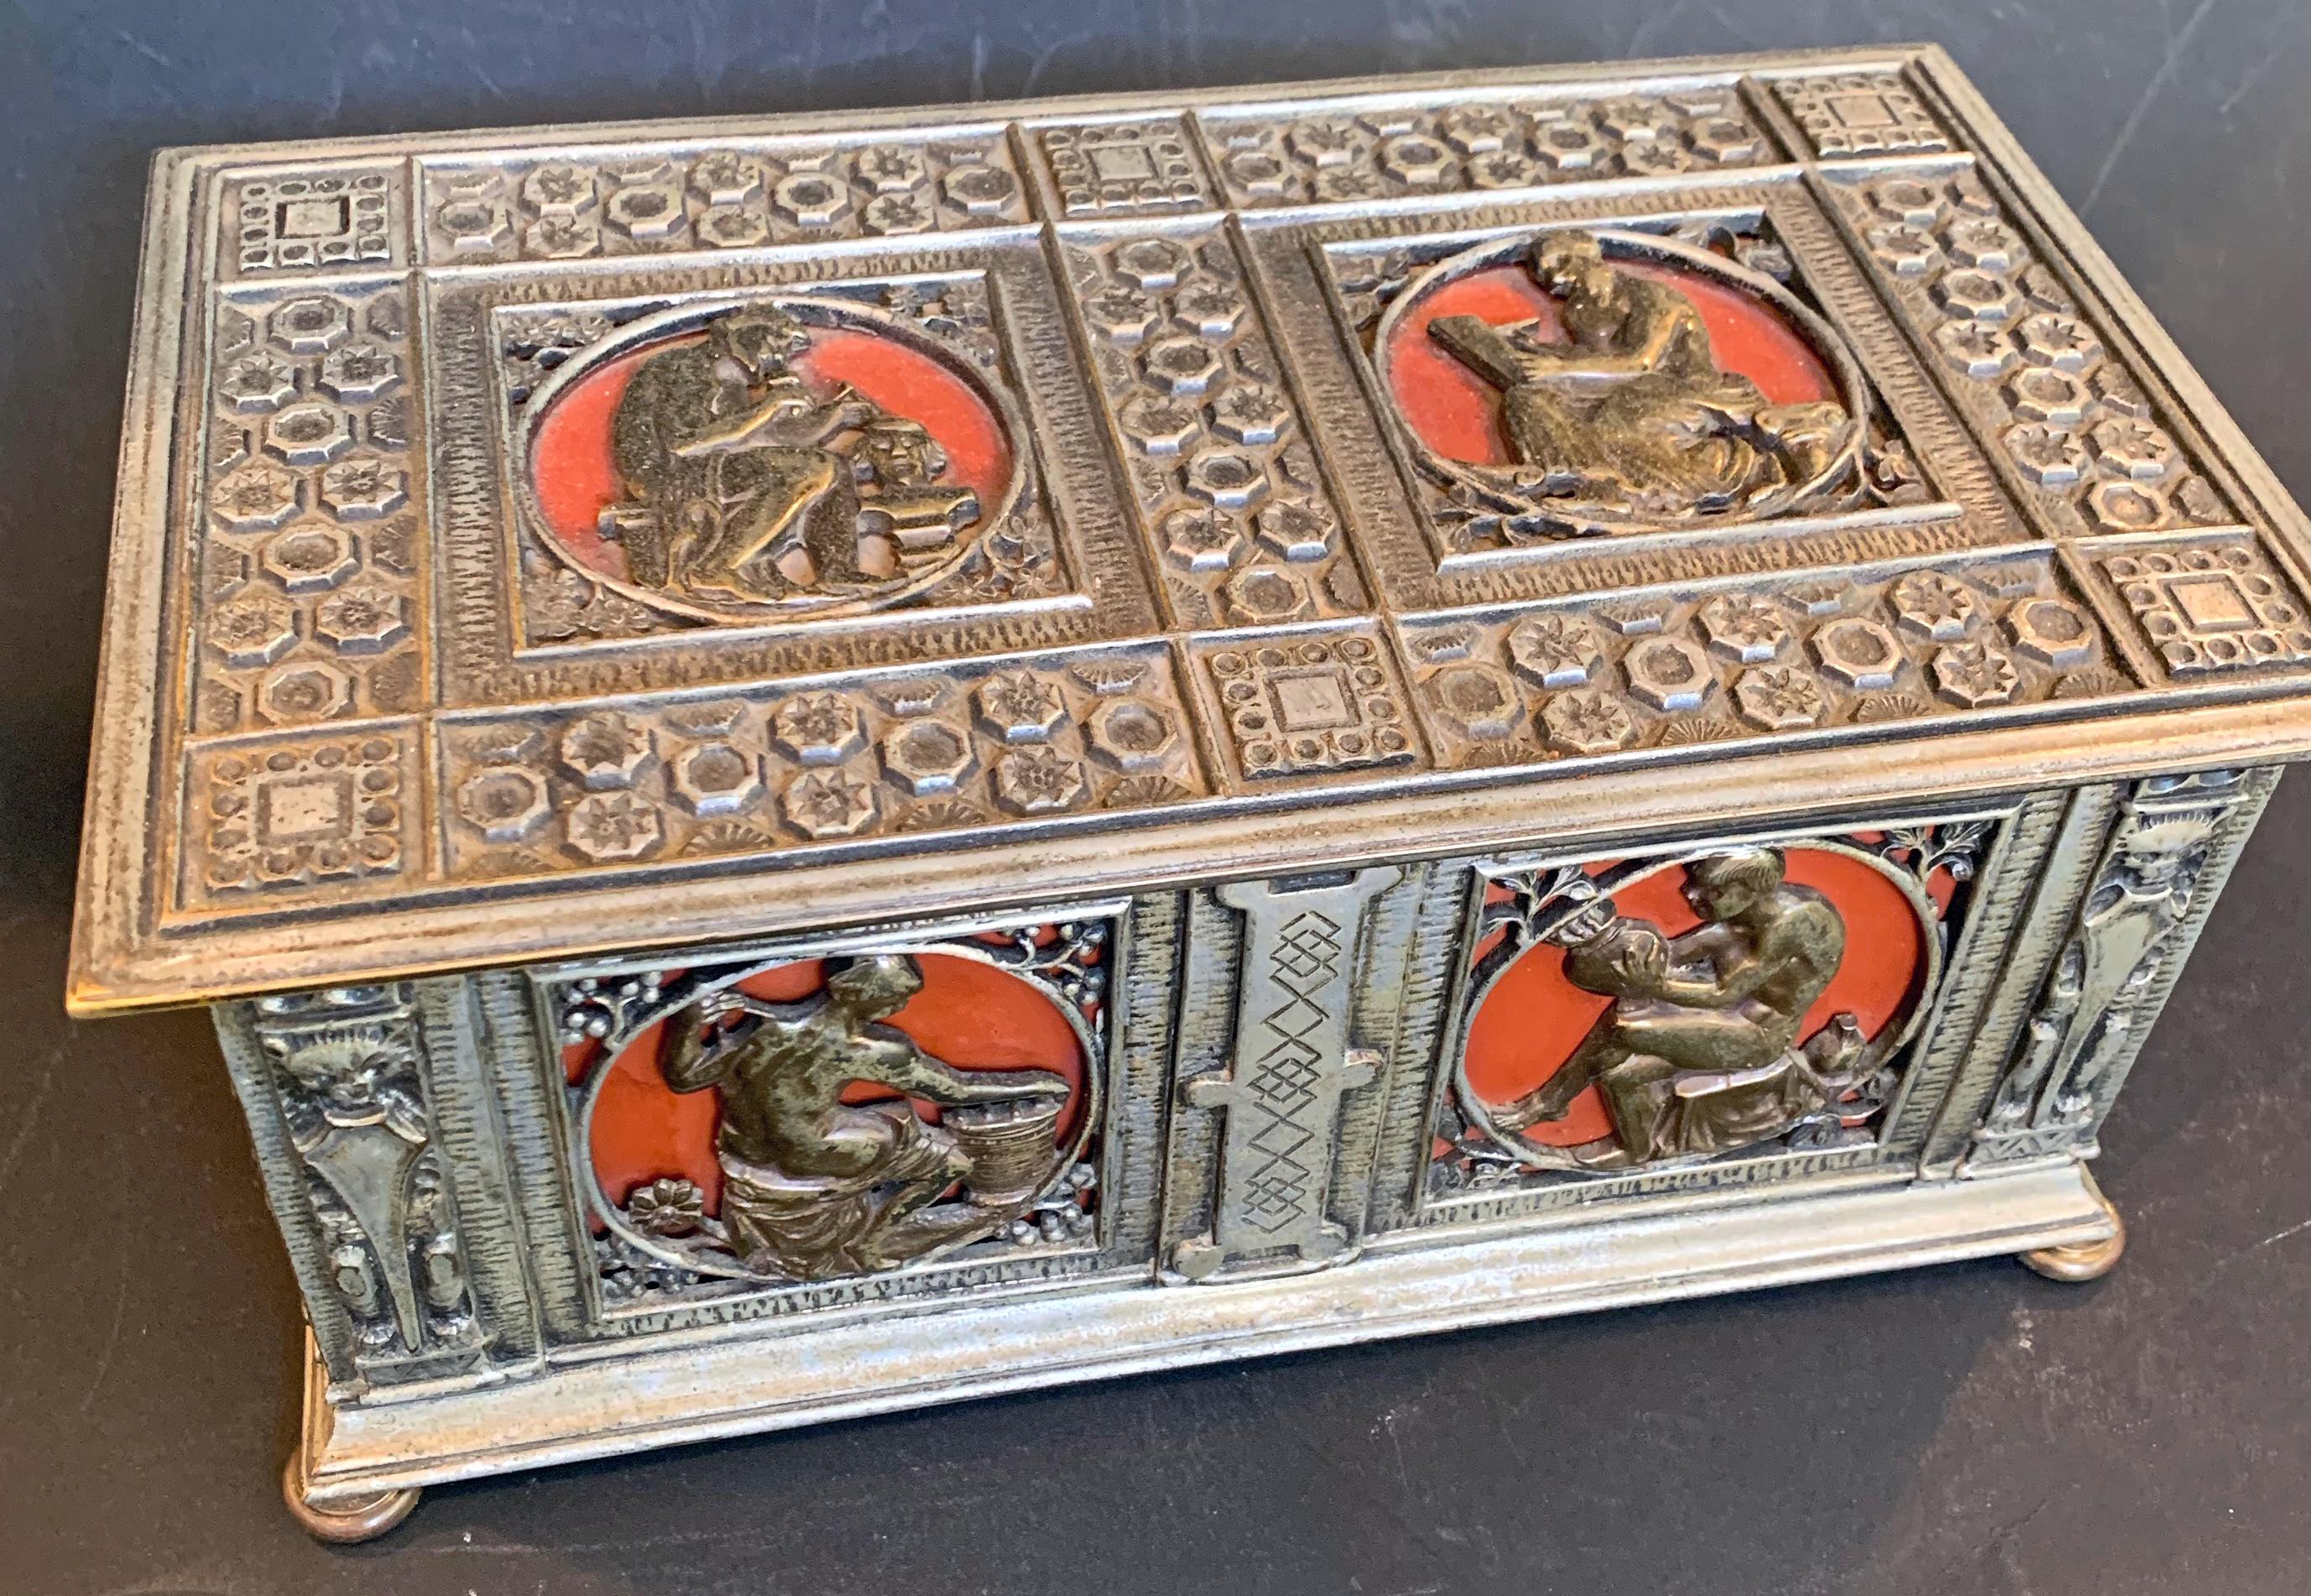 Beautifully detailed with symbols of the arts, including literature, sculpture, pottery and spinning, this silvered bronze casket with hinged lid and mahogany interior was produced by the famed Oscar Bach studios in New York City. In addition to a